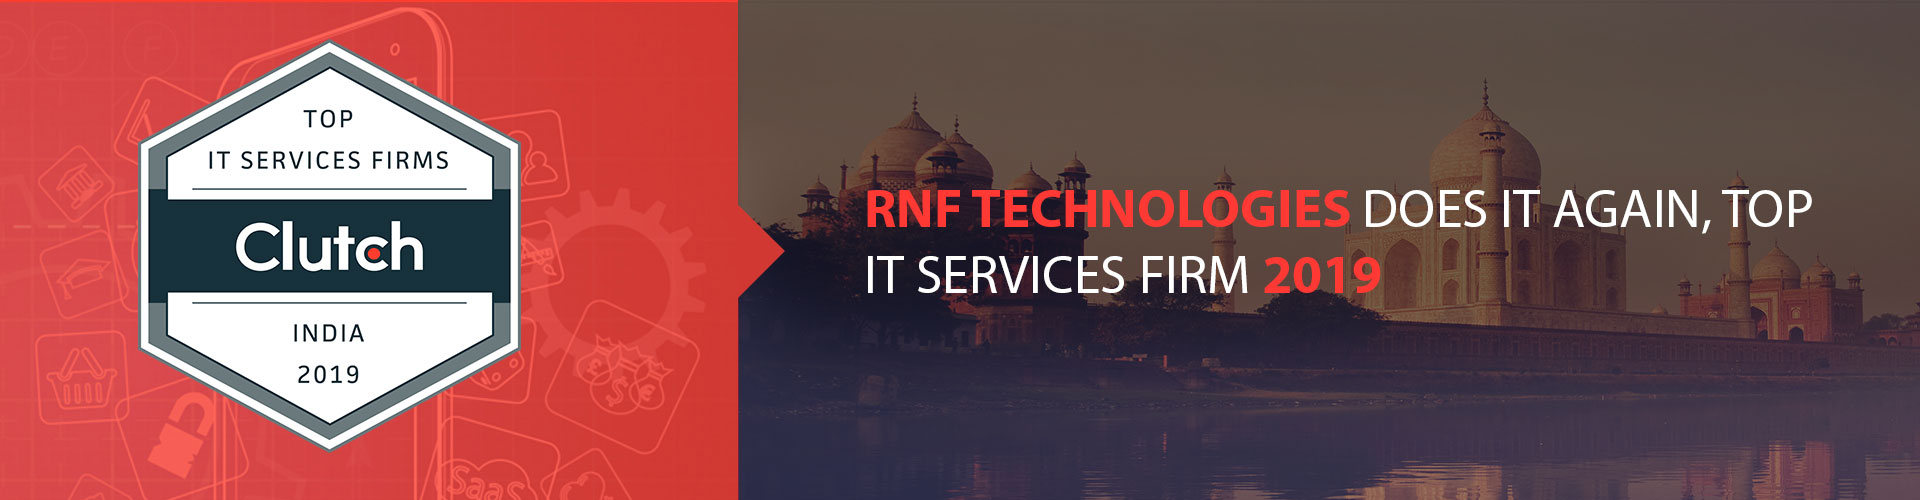 RNF Technologies Does it Again, TOP IT SERVICES FIRM 2019